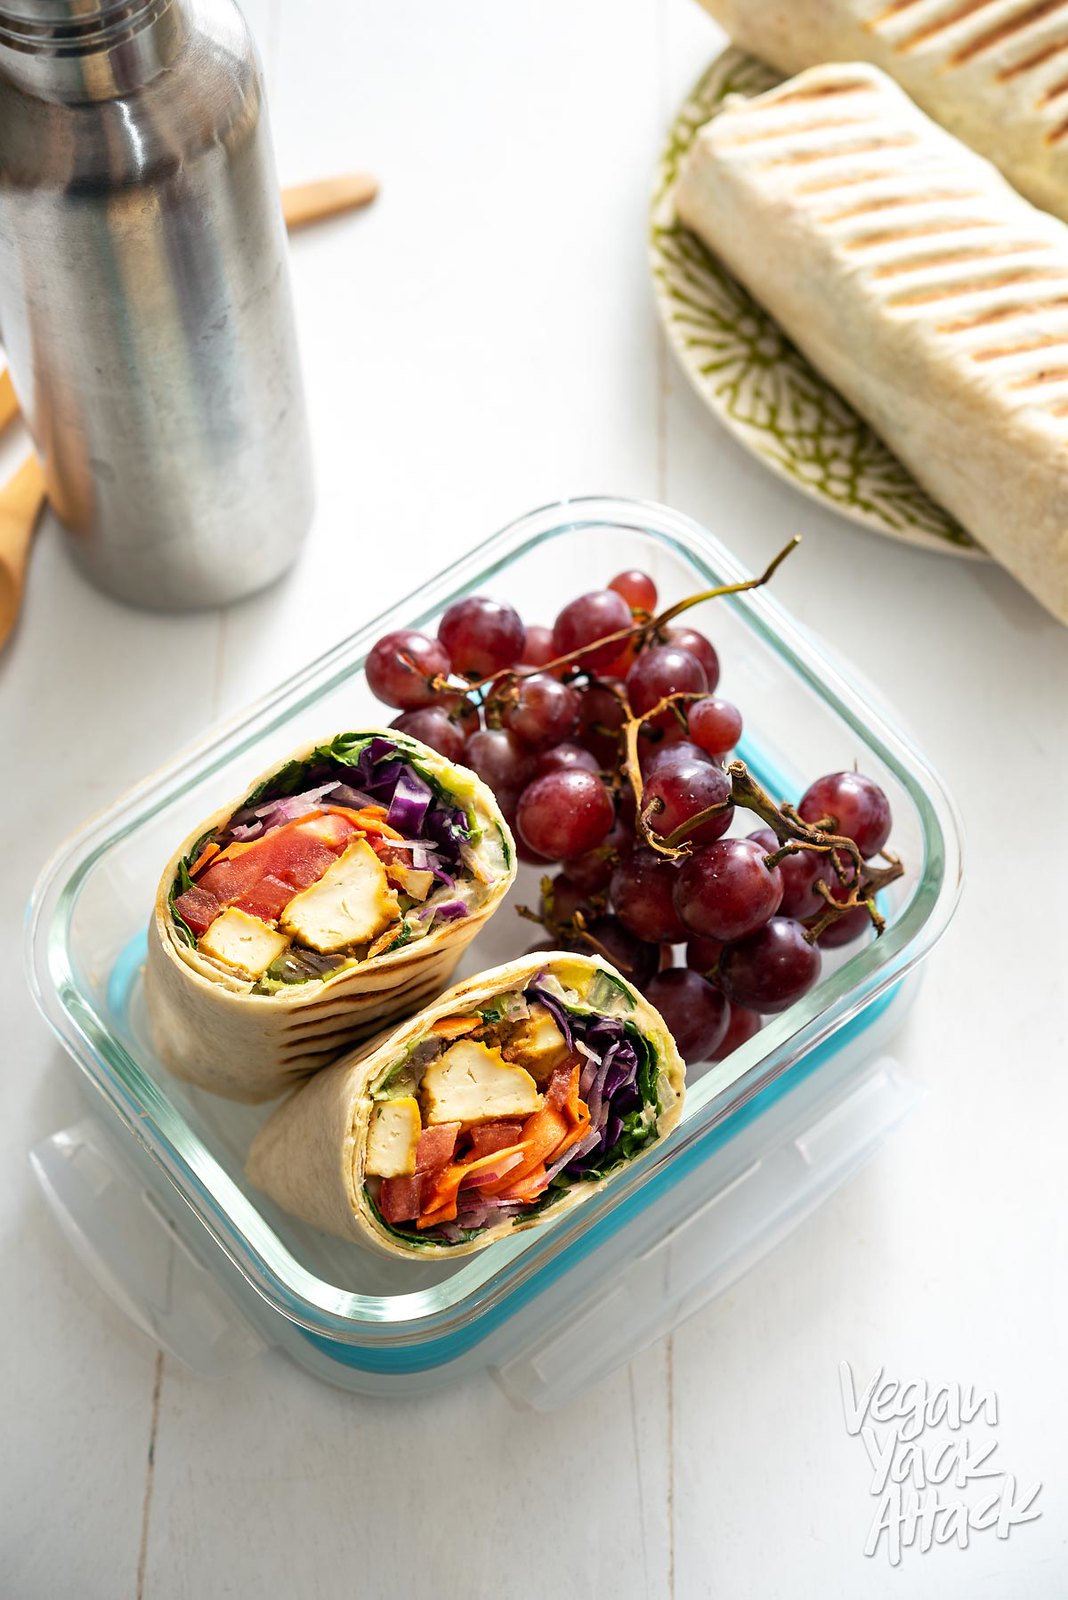 The end of summer is nearing, and that means it's time for some back-to-school recipes! Try these crispy chipotle tofu rainbow wraps out, to make everyone envious of your fresh lunch. #backtoschool #lunch #wrap #vegan